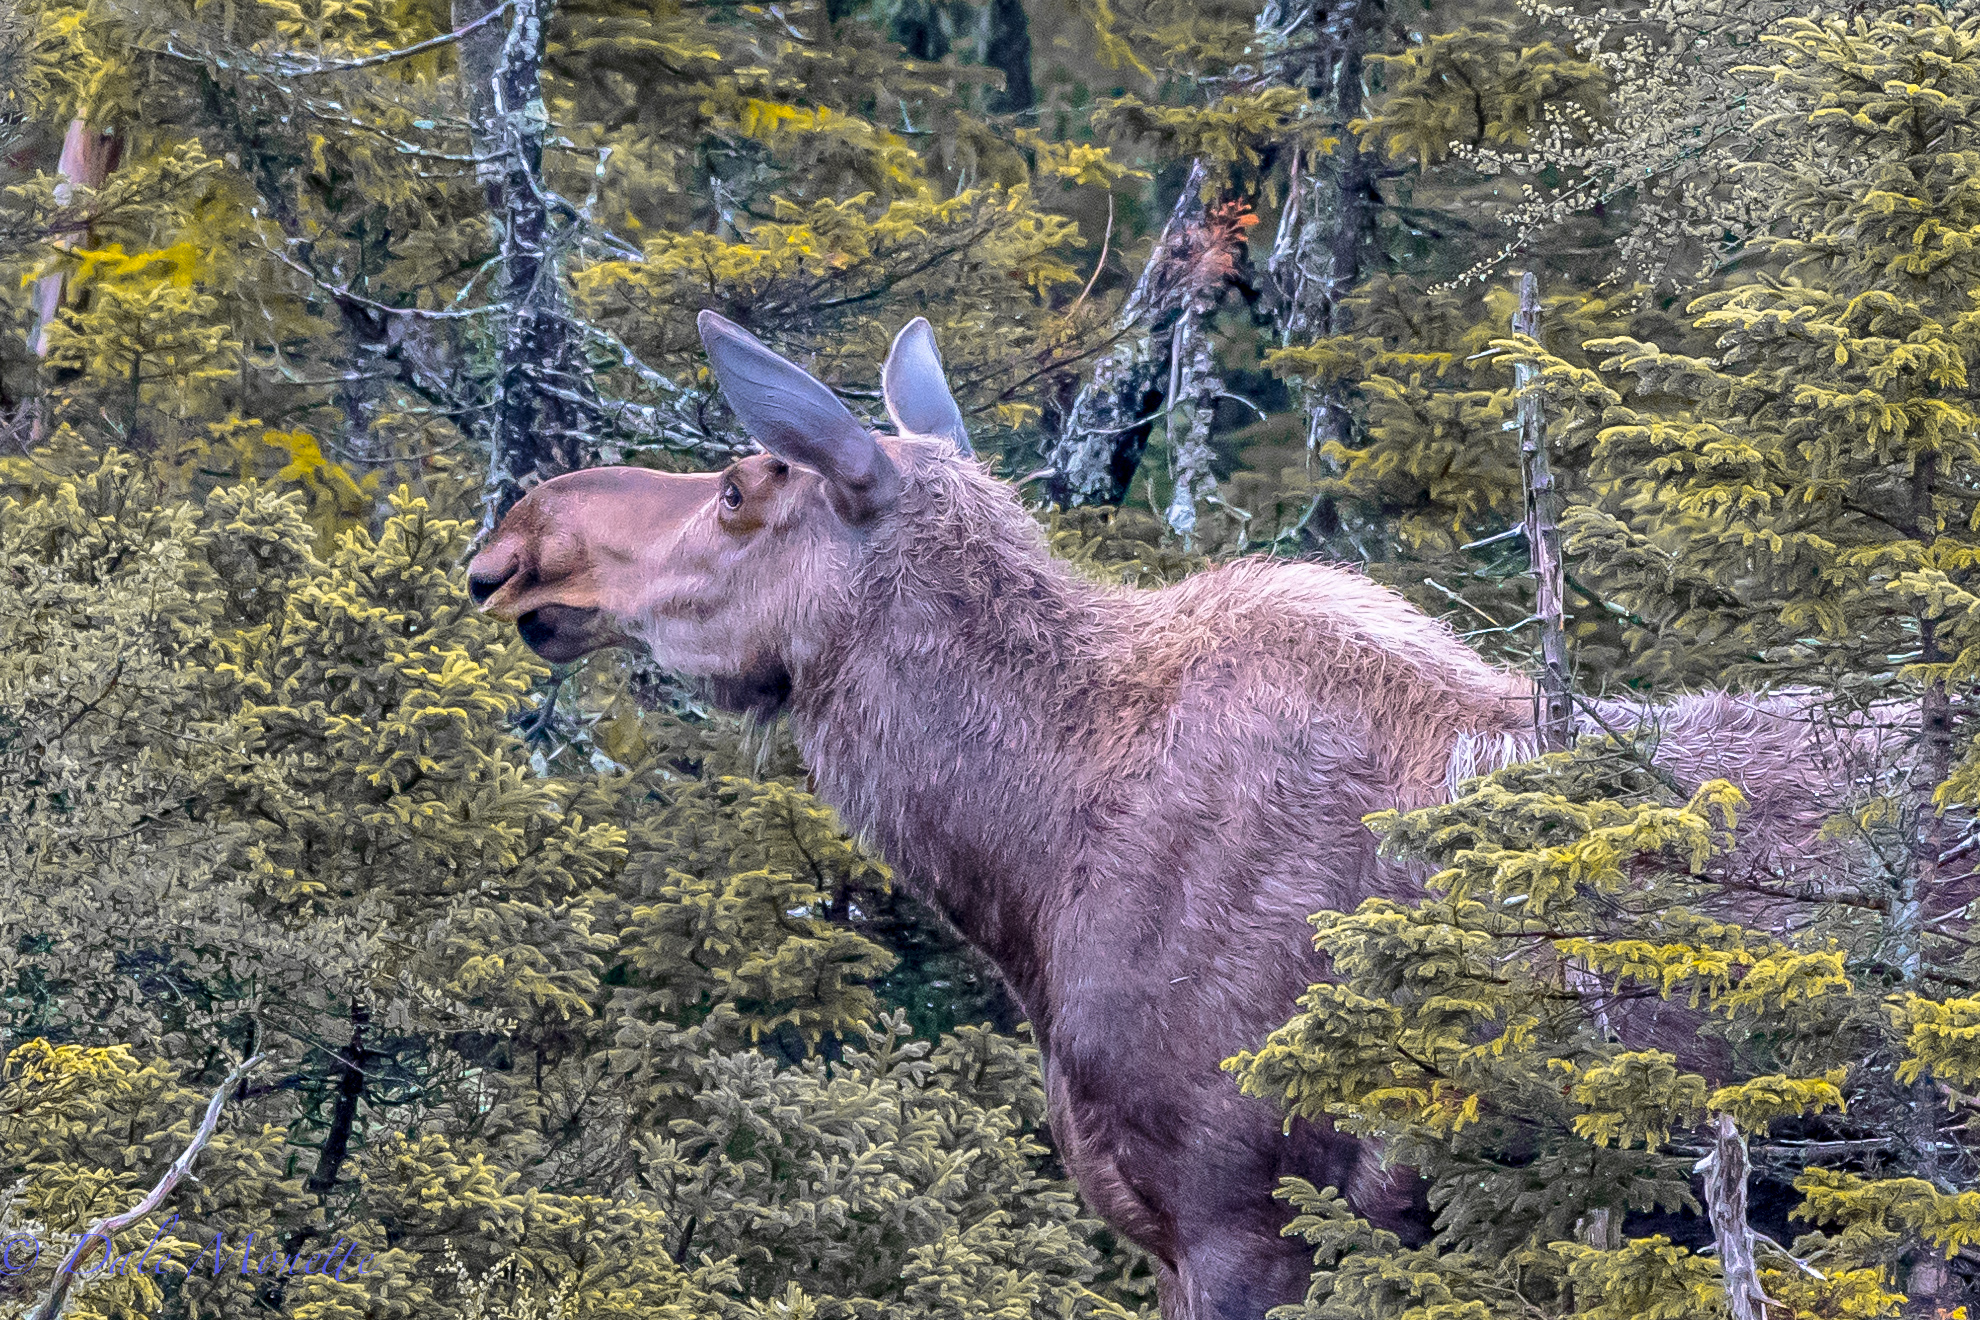   A female moose detects maybe another moose clumping through the woods or she sniffs another one coming. &nbsp;They have a great sense of smell. &nbsp;Benji's Lake, Cape Breton Highlands National Park, Nova Scotia. &nbsp;6/21/16  